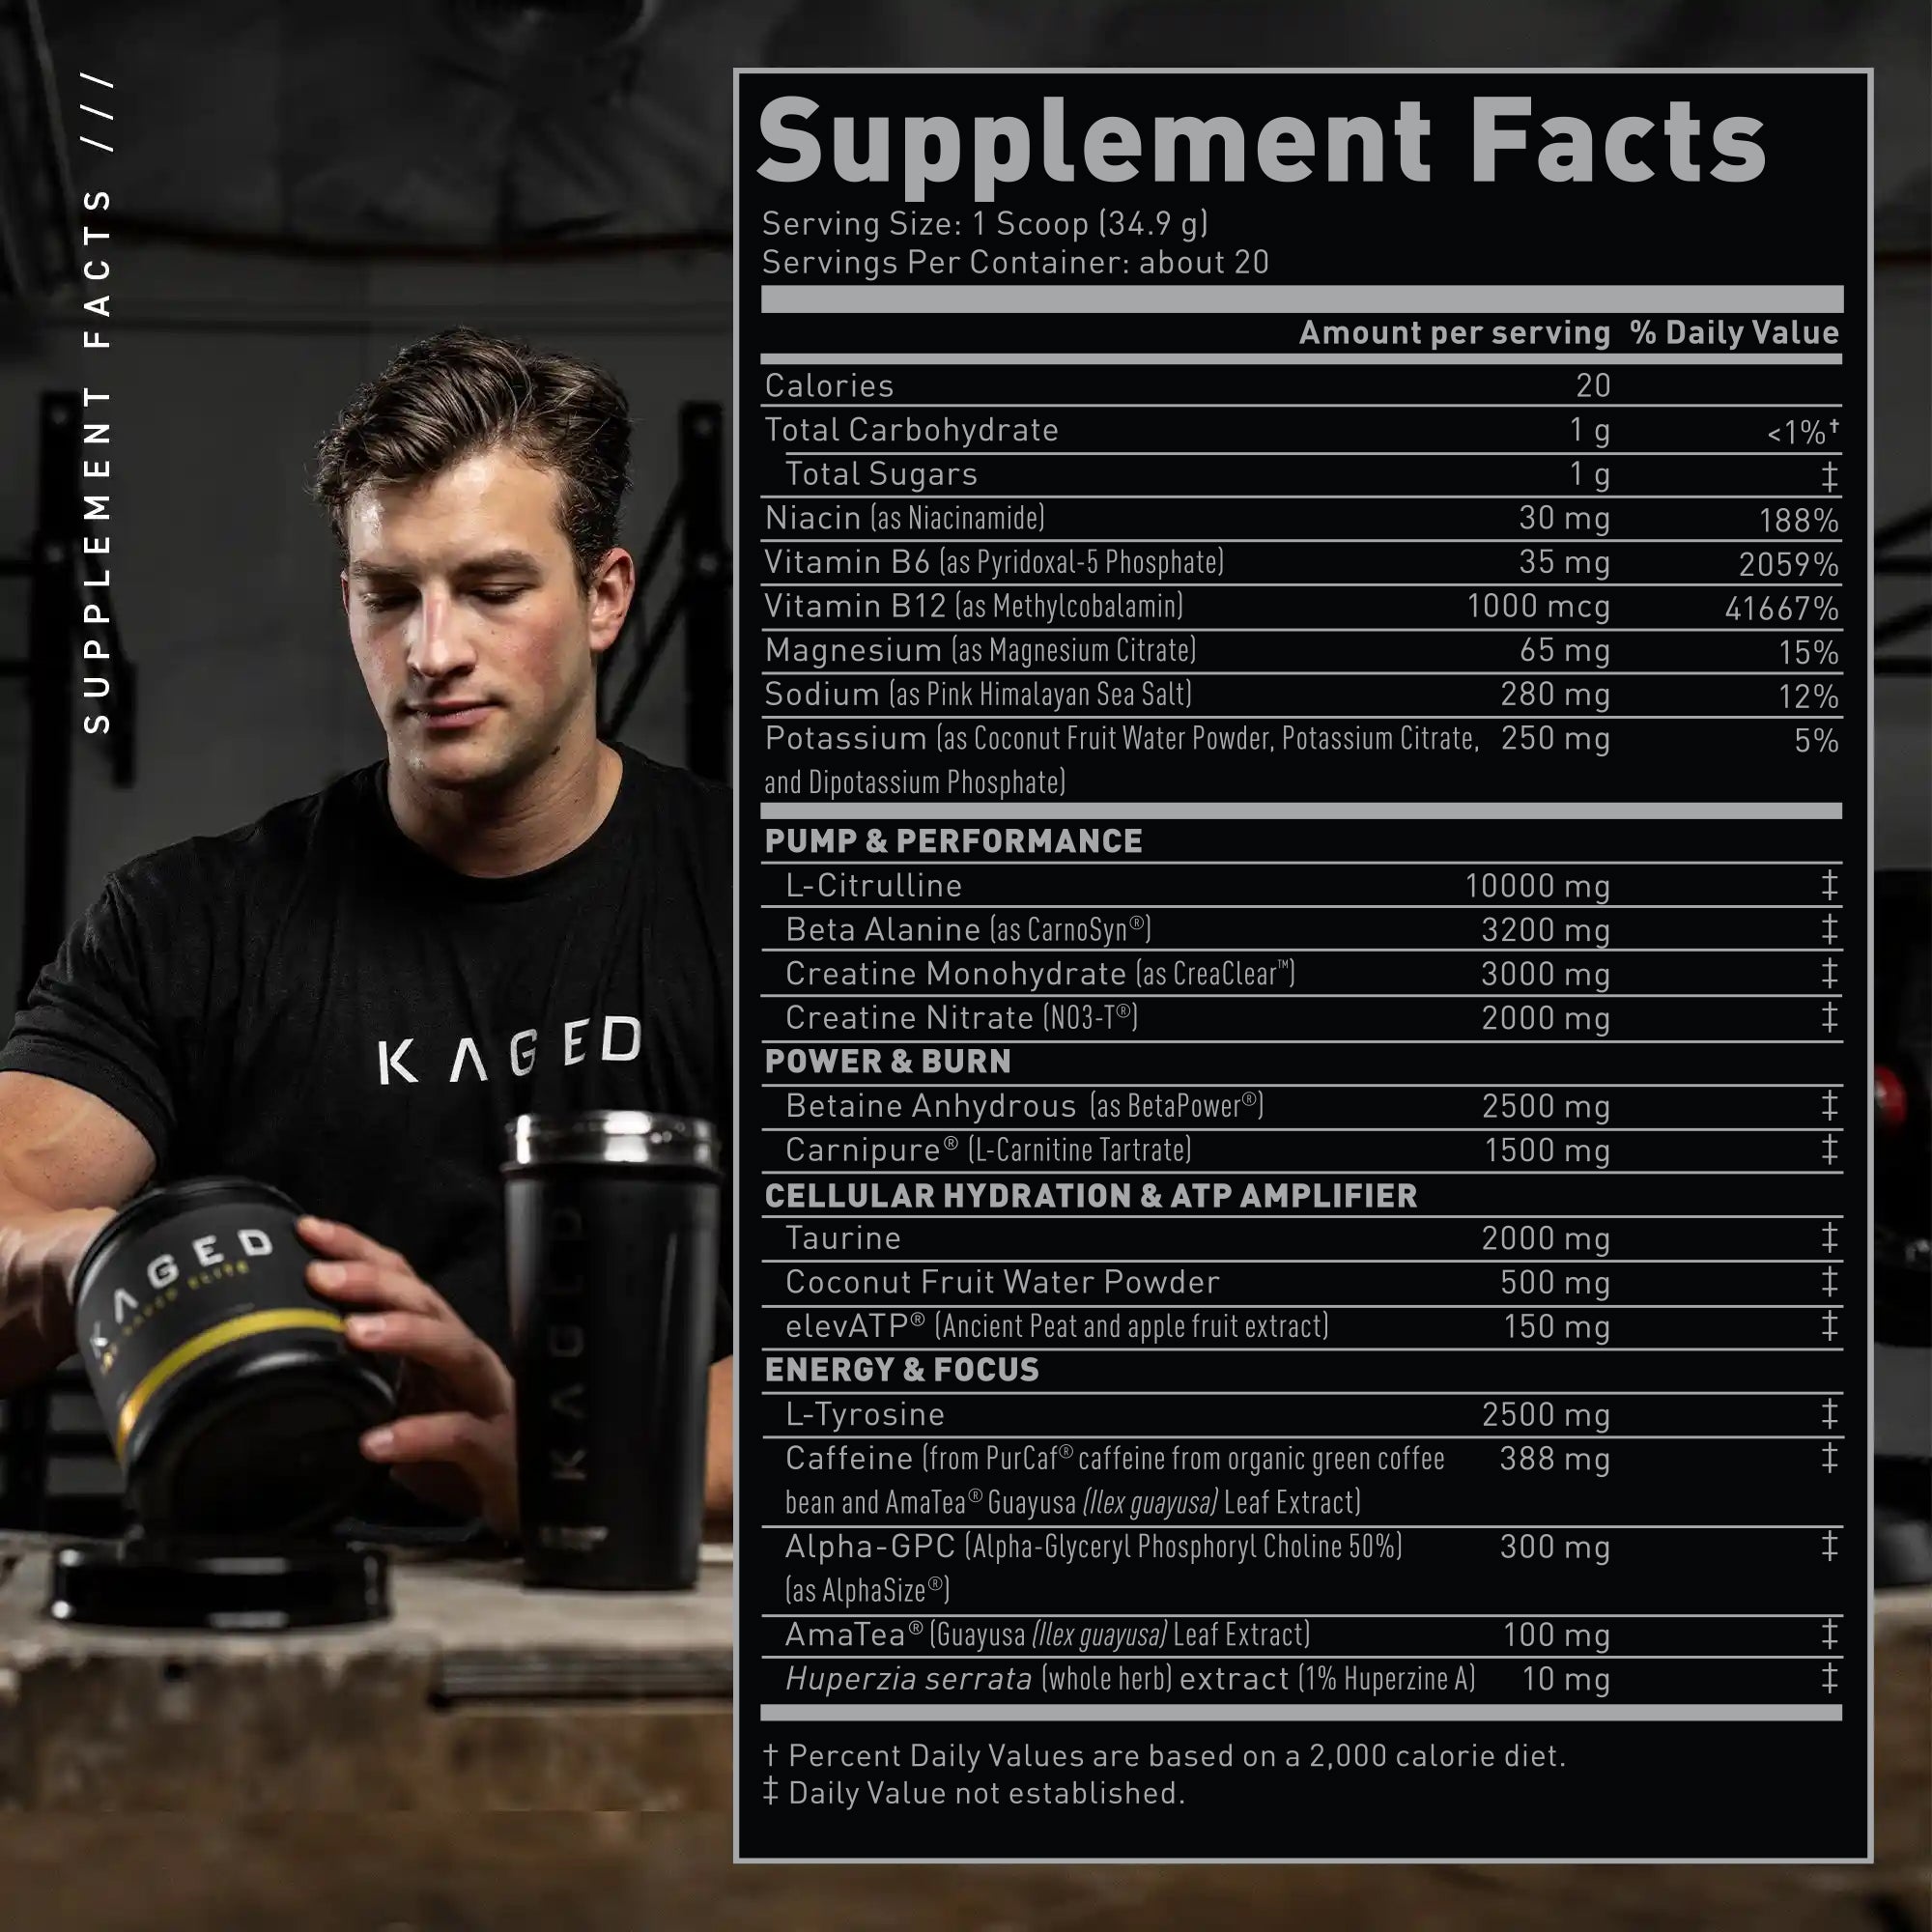 Pre-Kaged Elite Supplement Facts